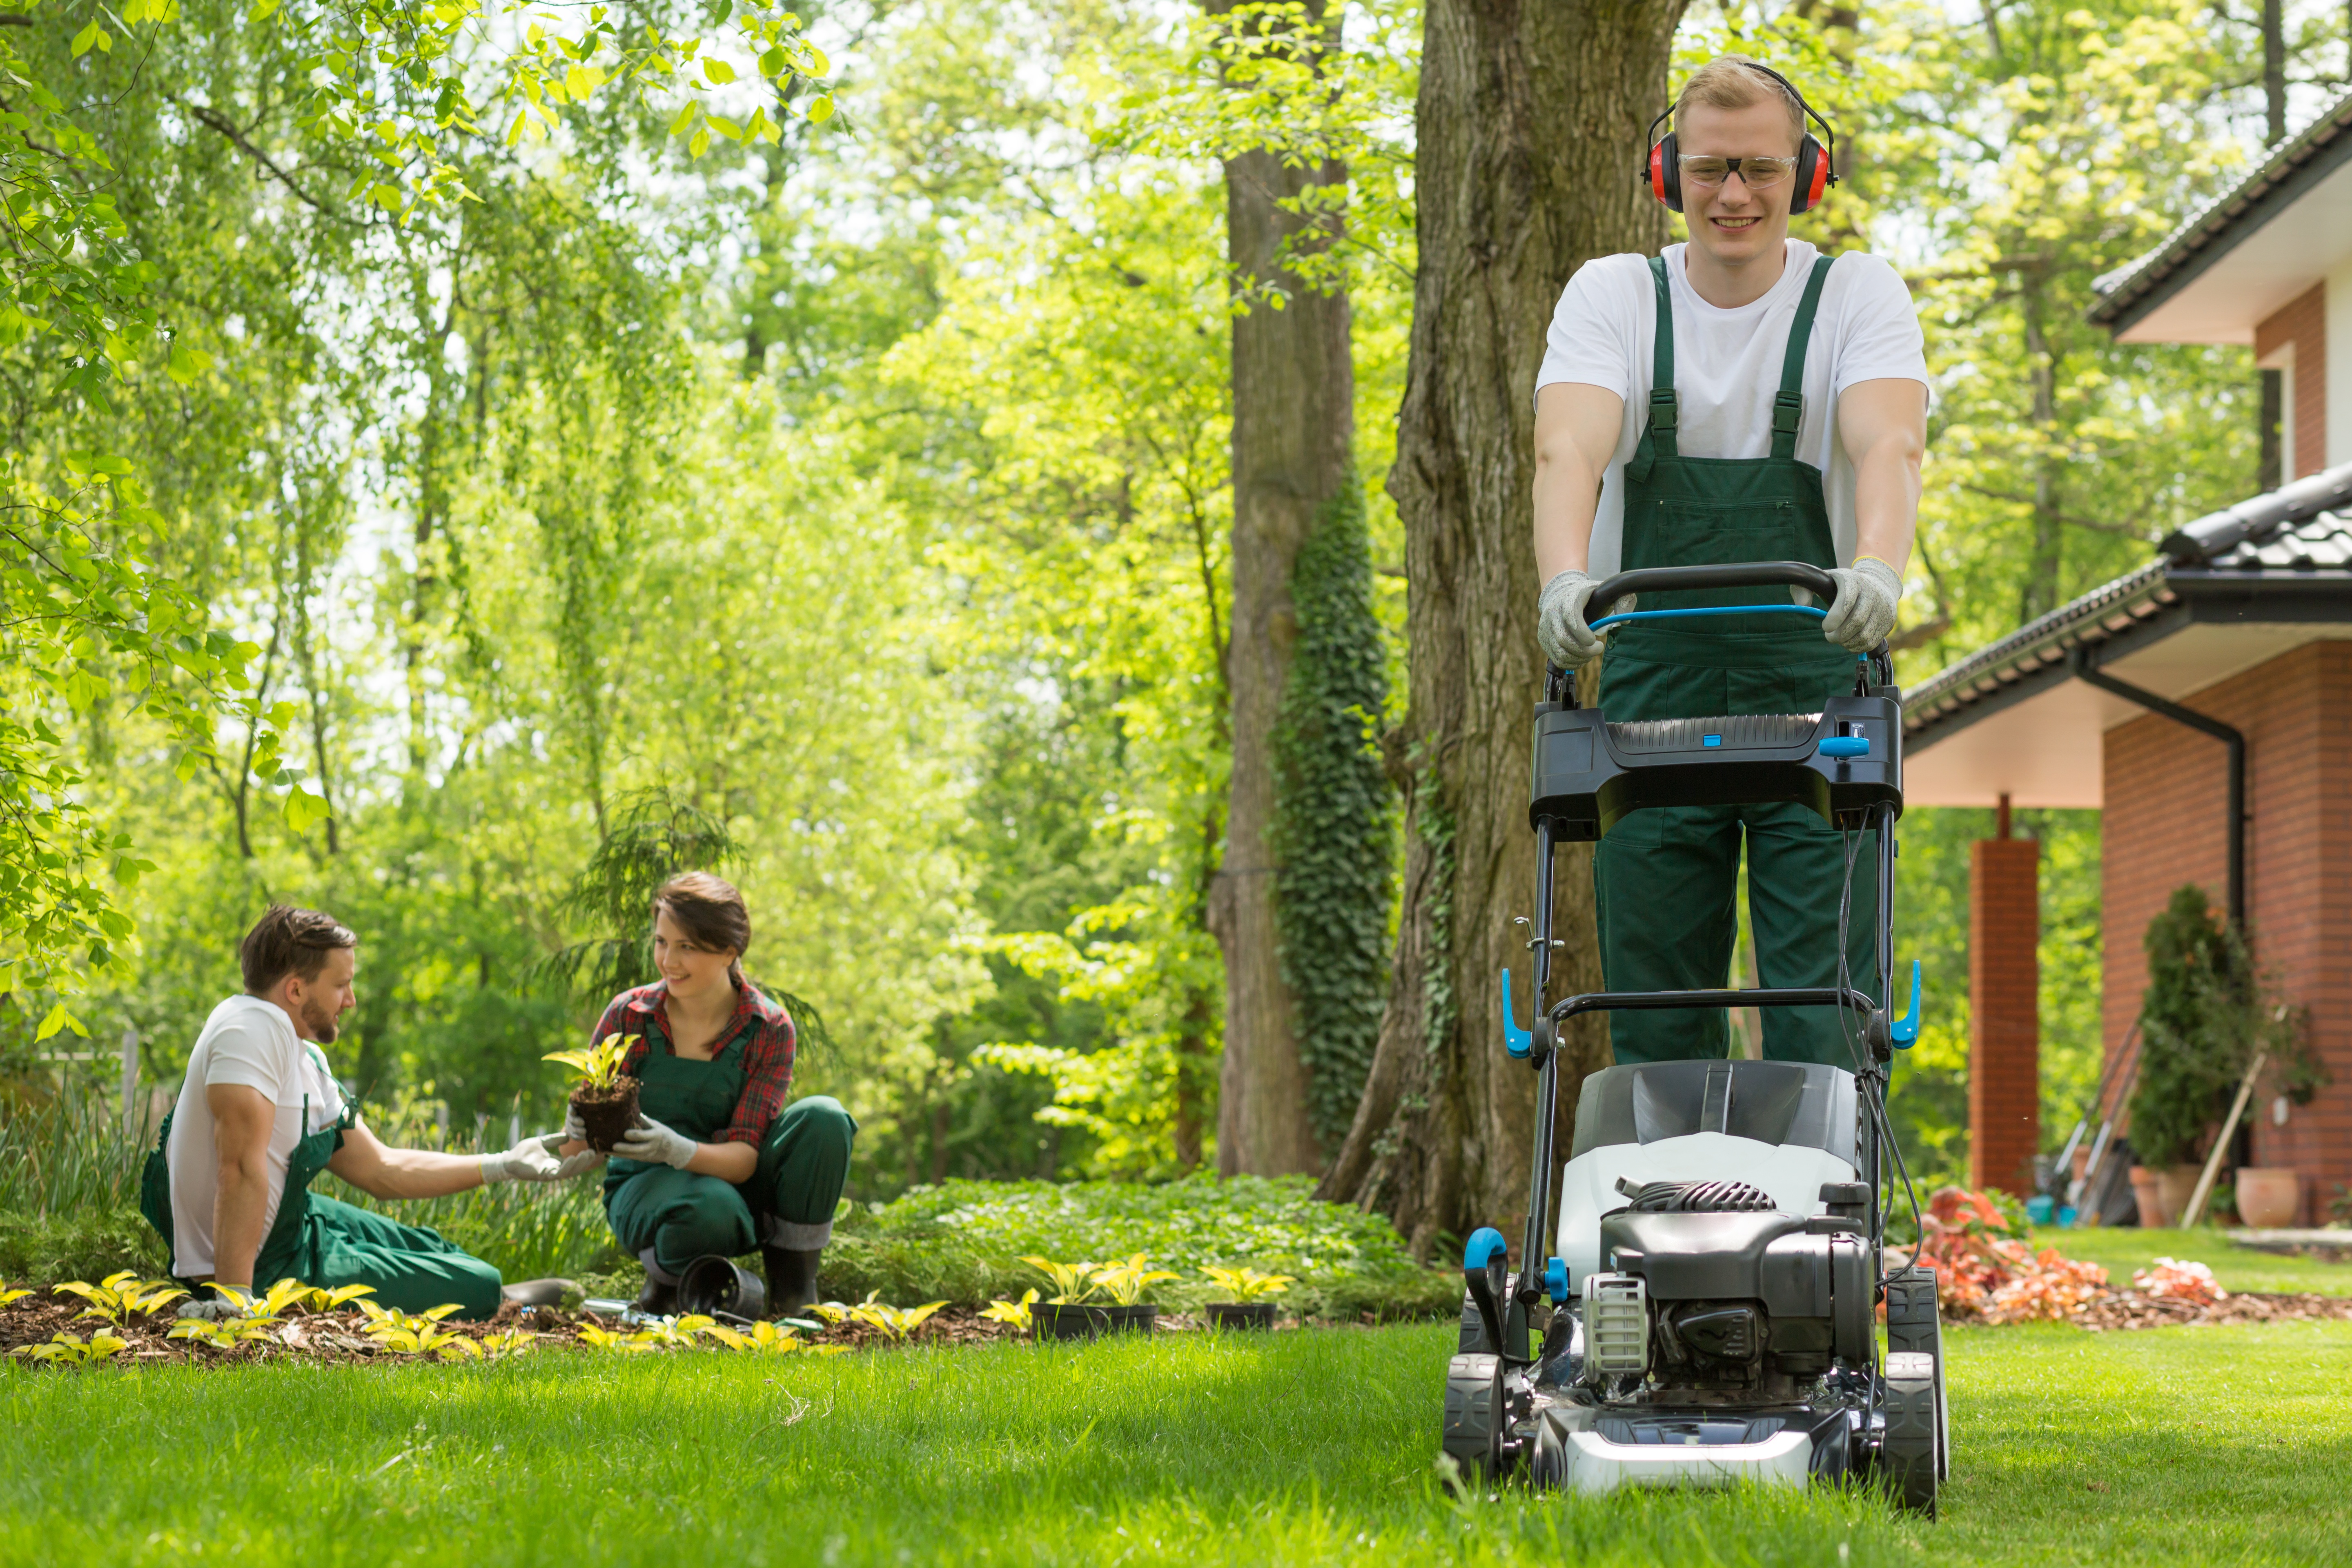 Always refer to the owners manual for operating and safety instructions before attempting to operate your lawn mower. 